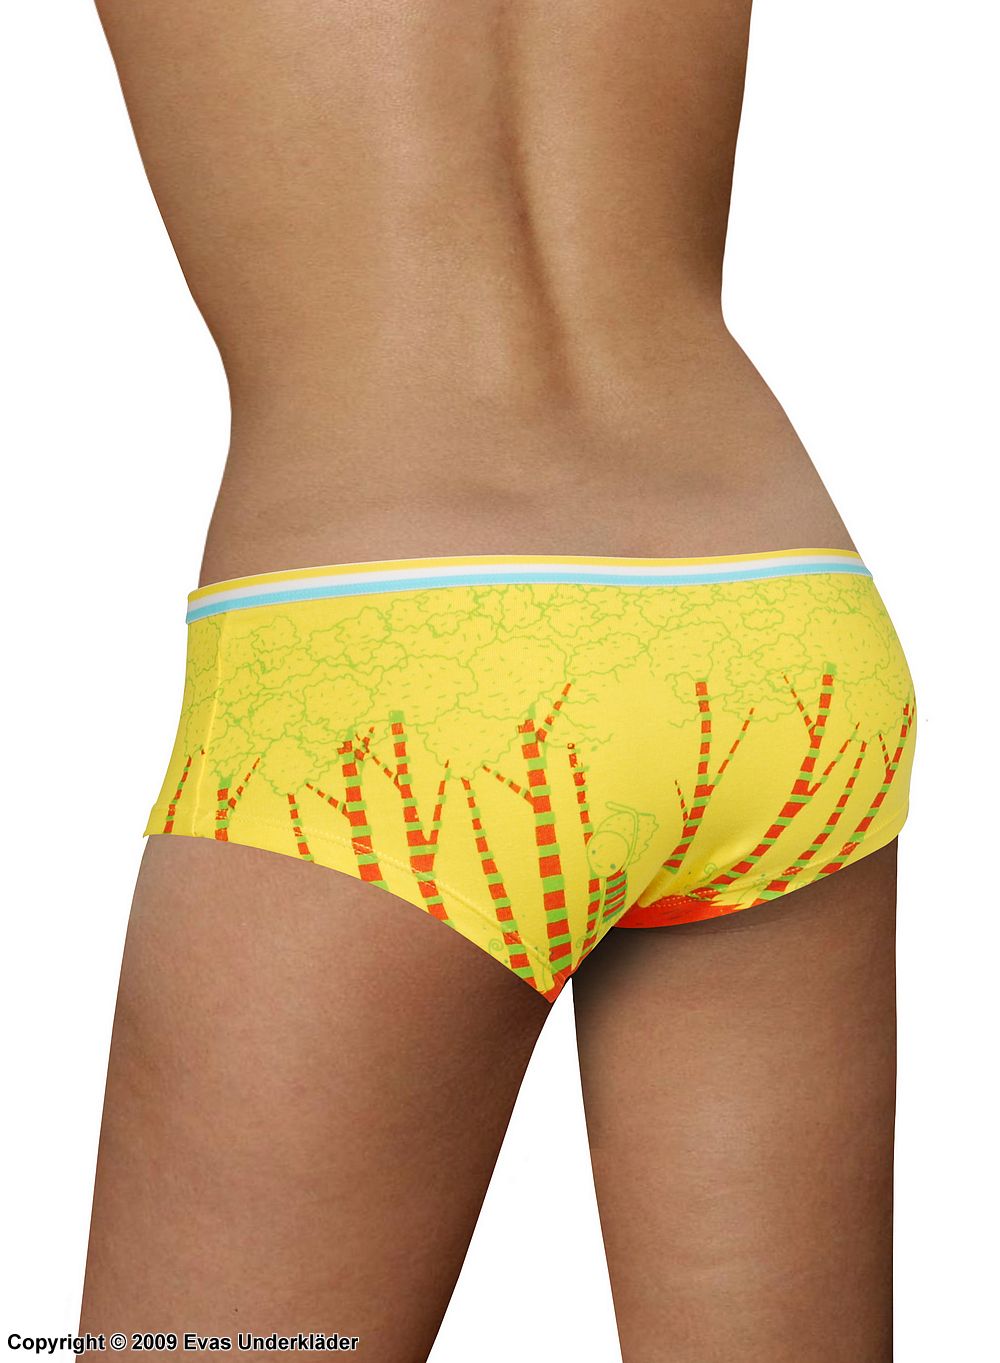 Hipster panty with trees